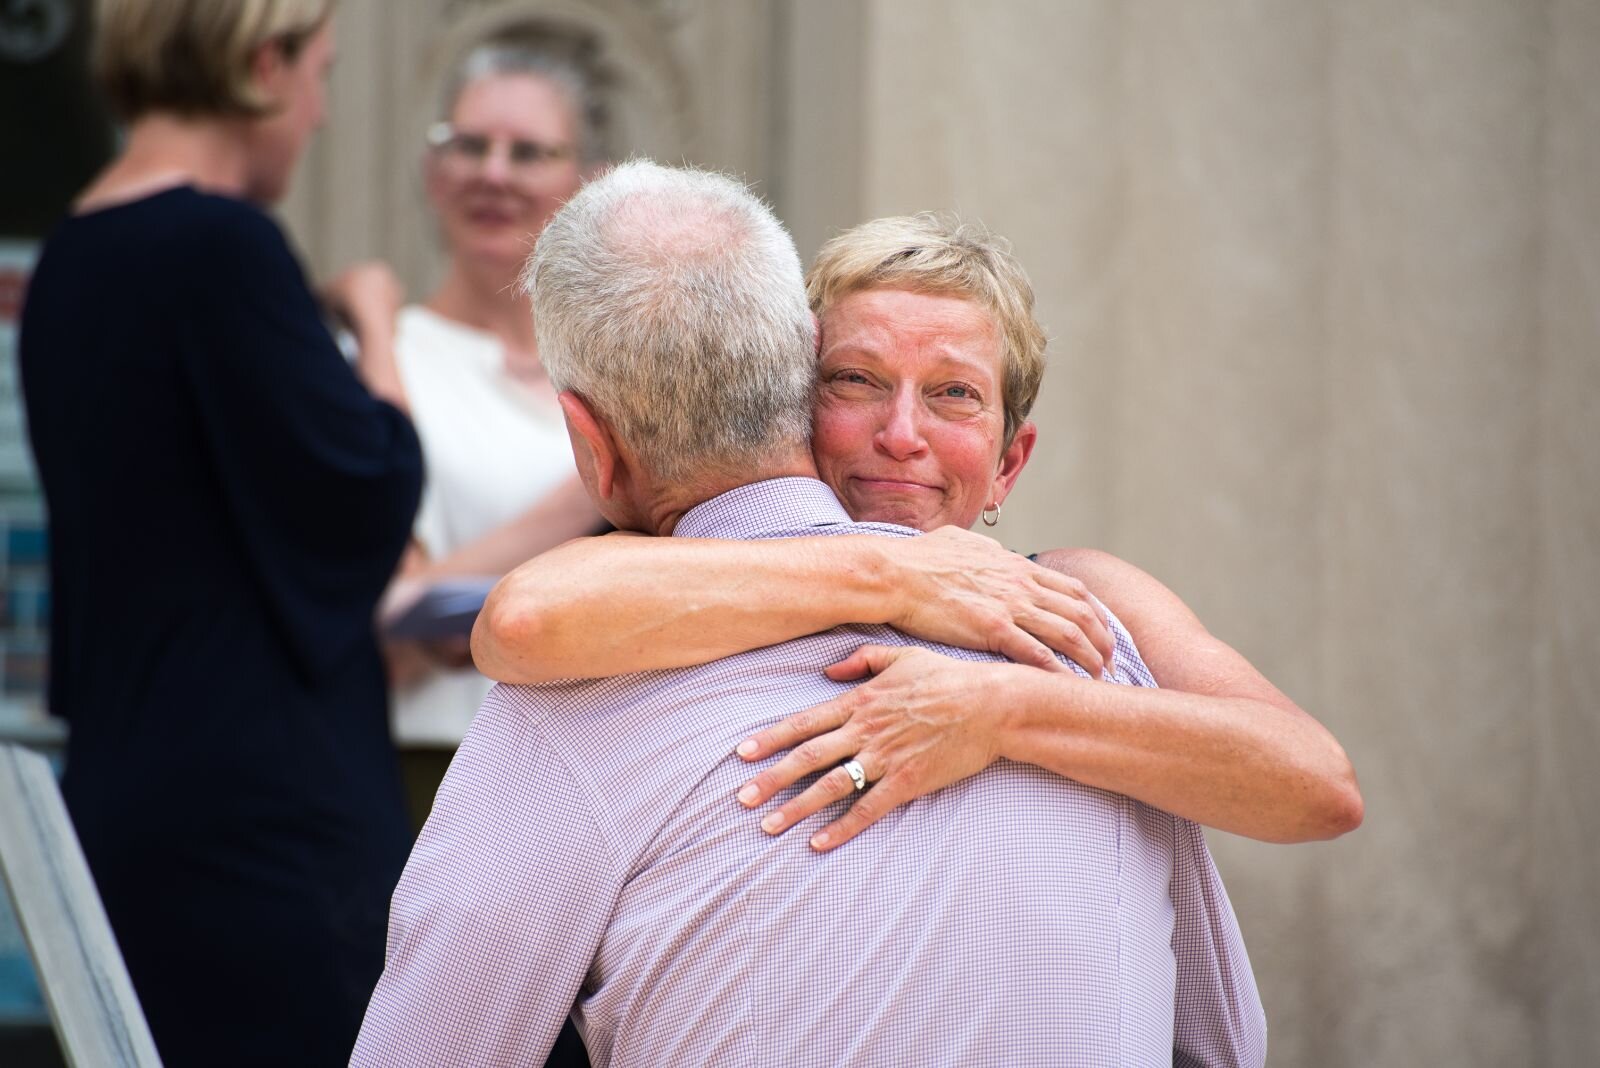 City Commissioner Jeanne Hess gives a hug to one of those in attendance at a press conference to announce a $400 million donation to the Foundation for Excellence.